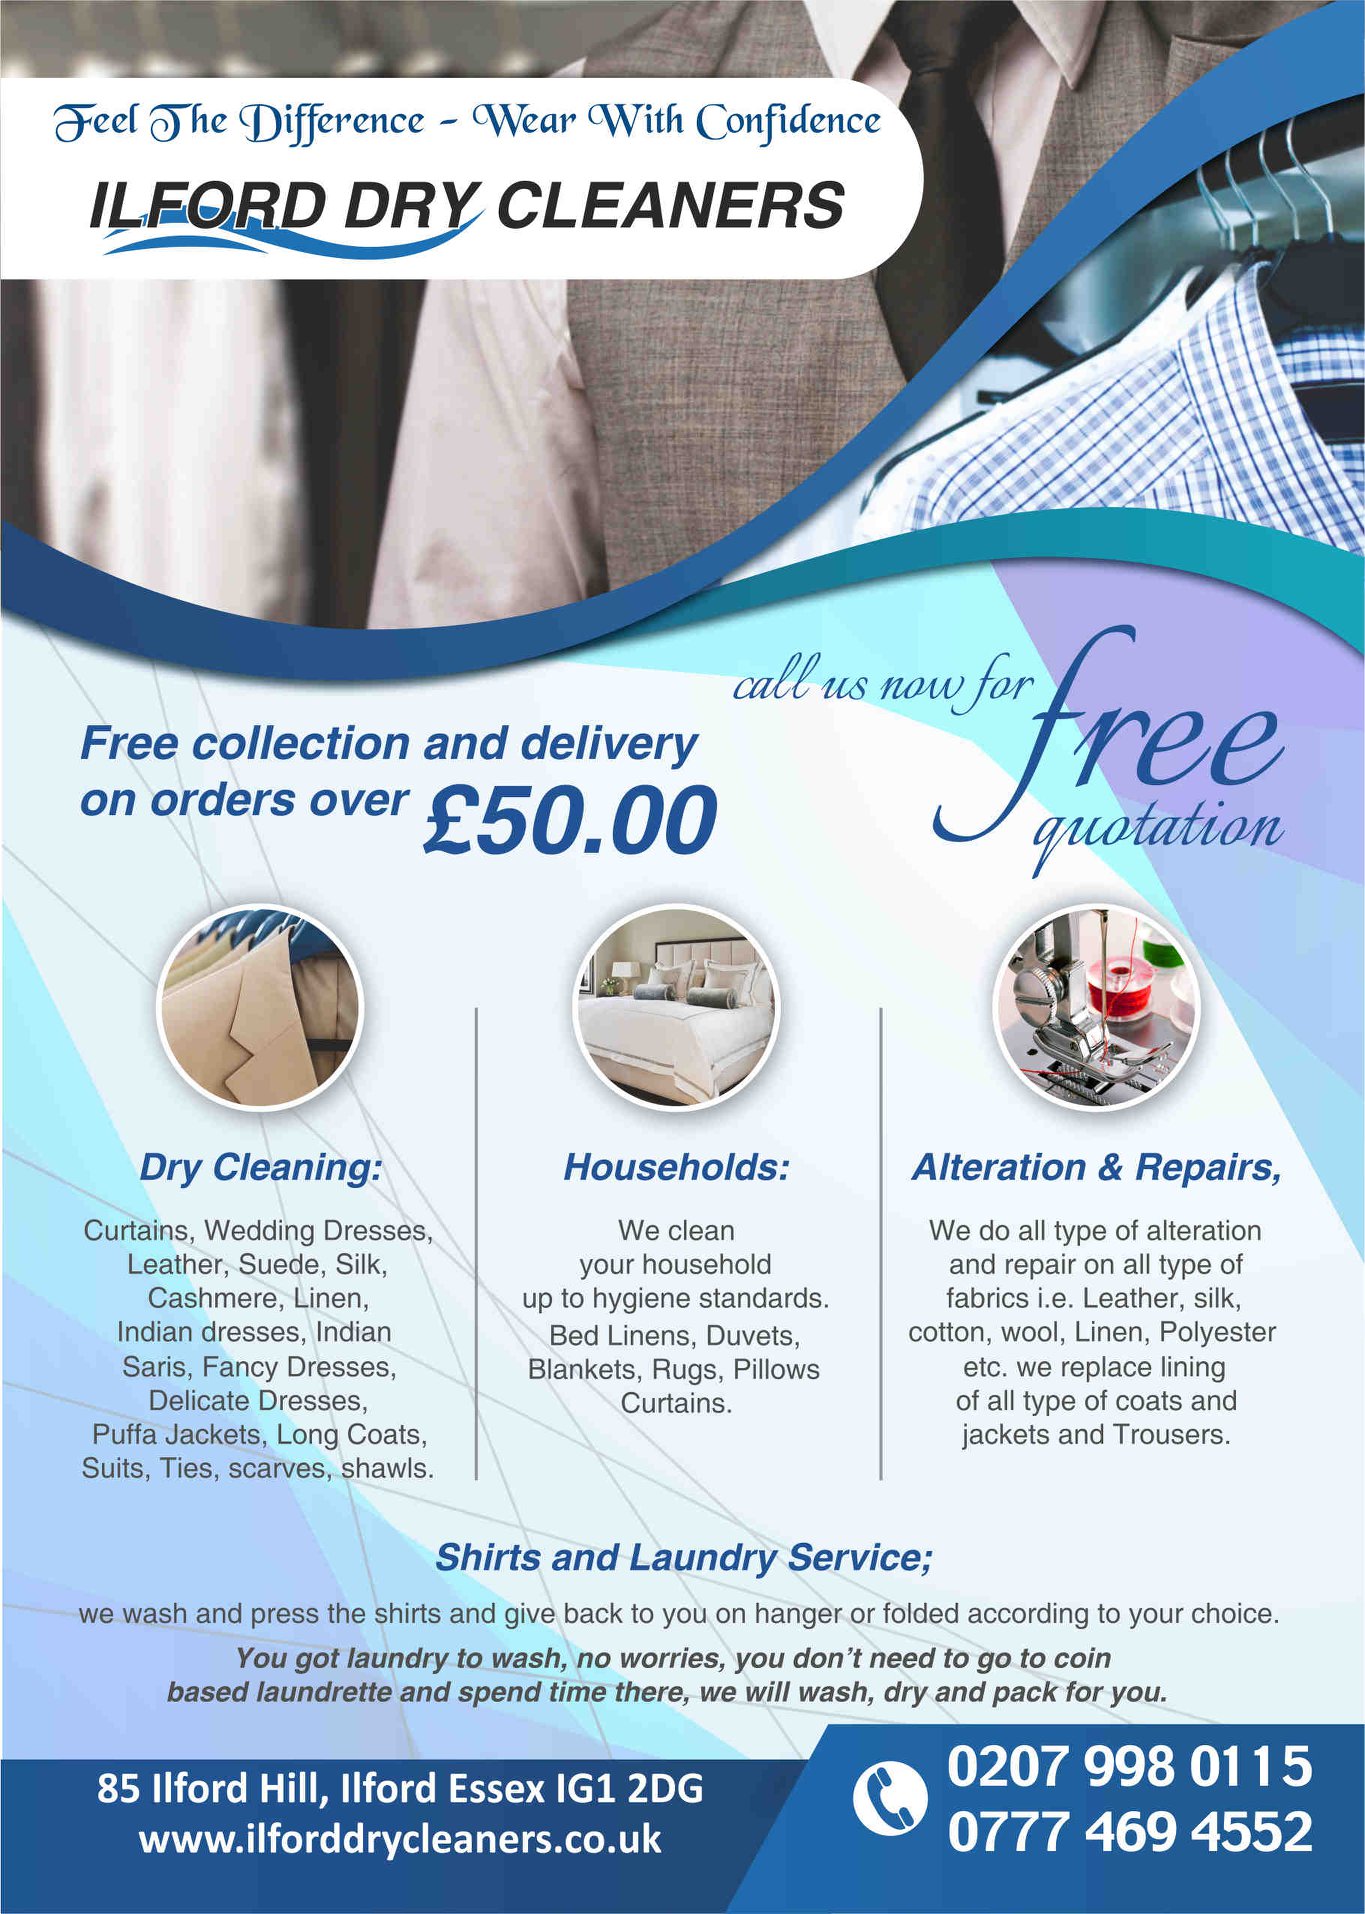 Ilford Dry Cleaners